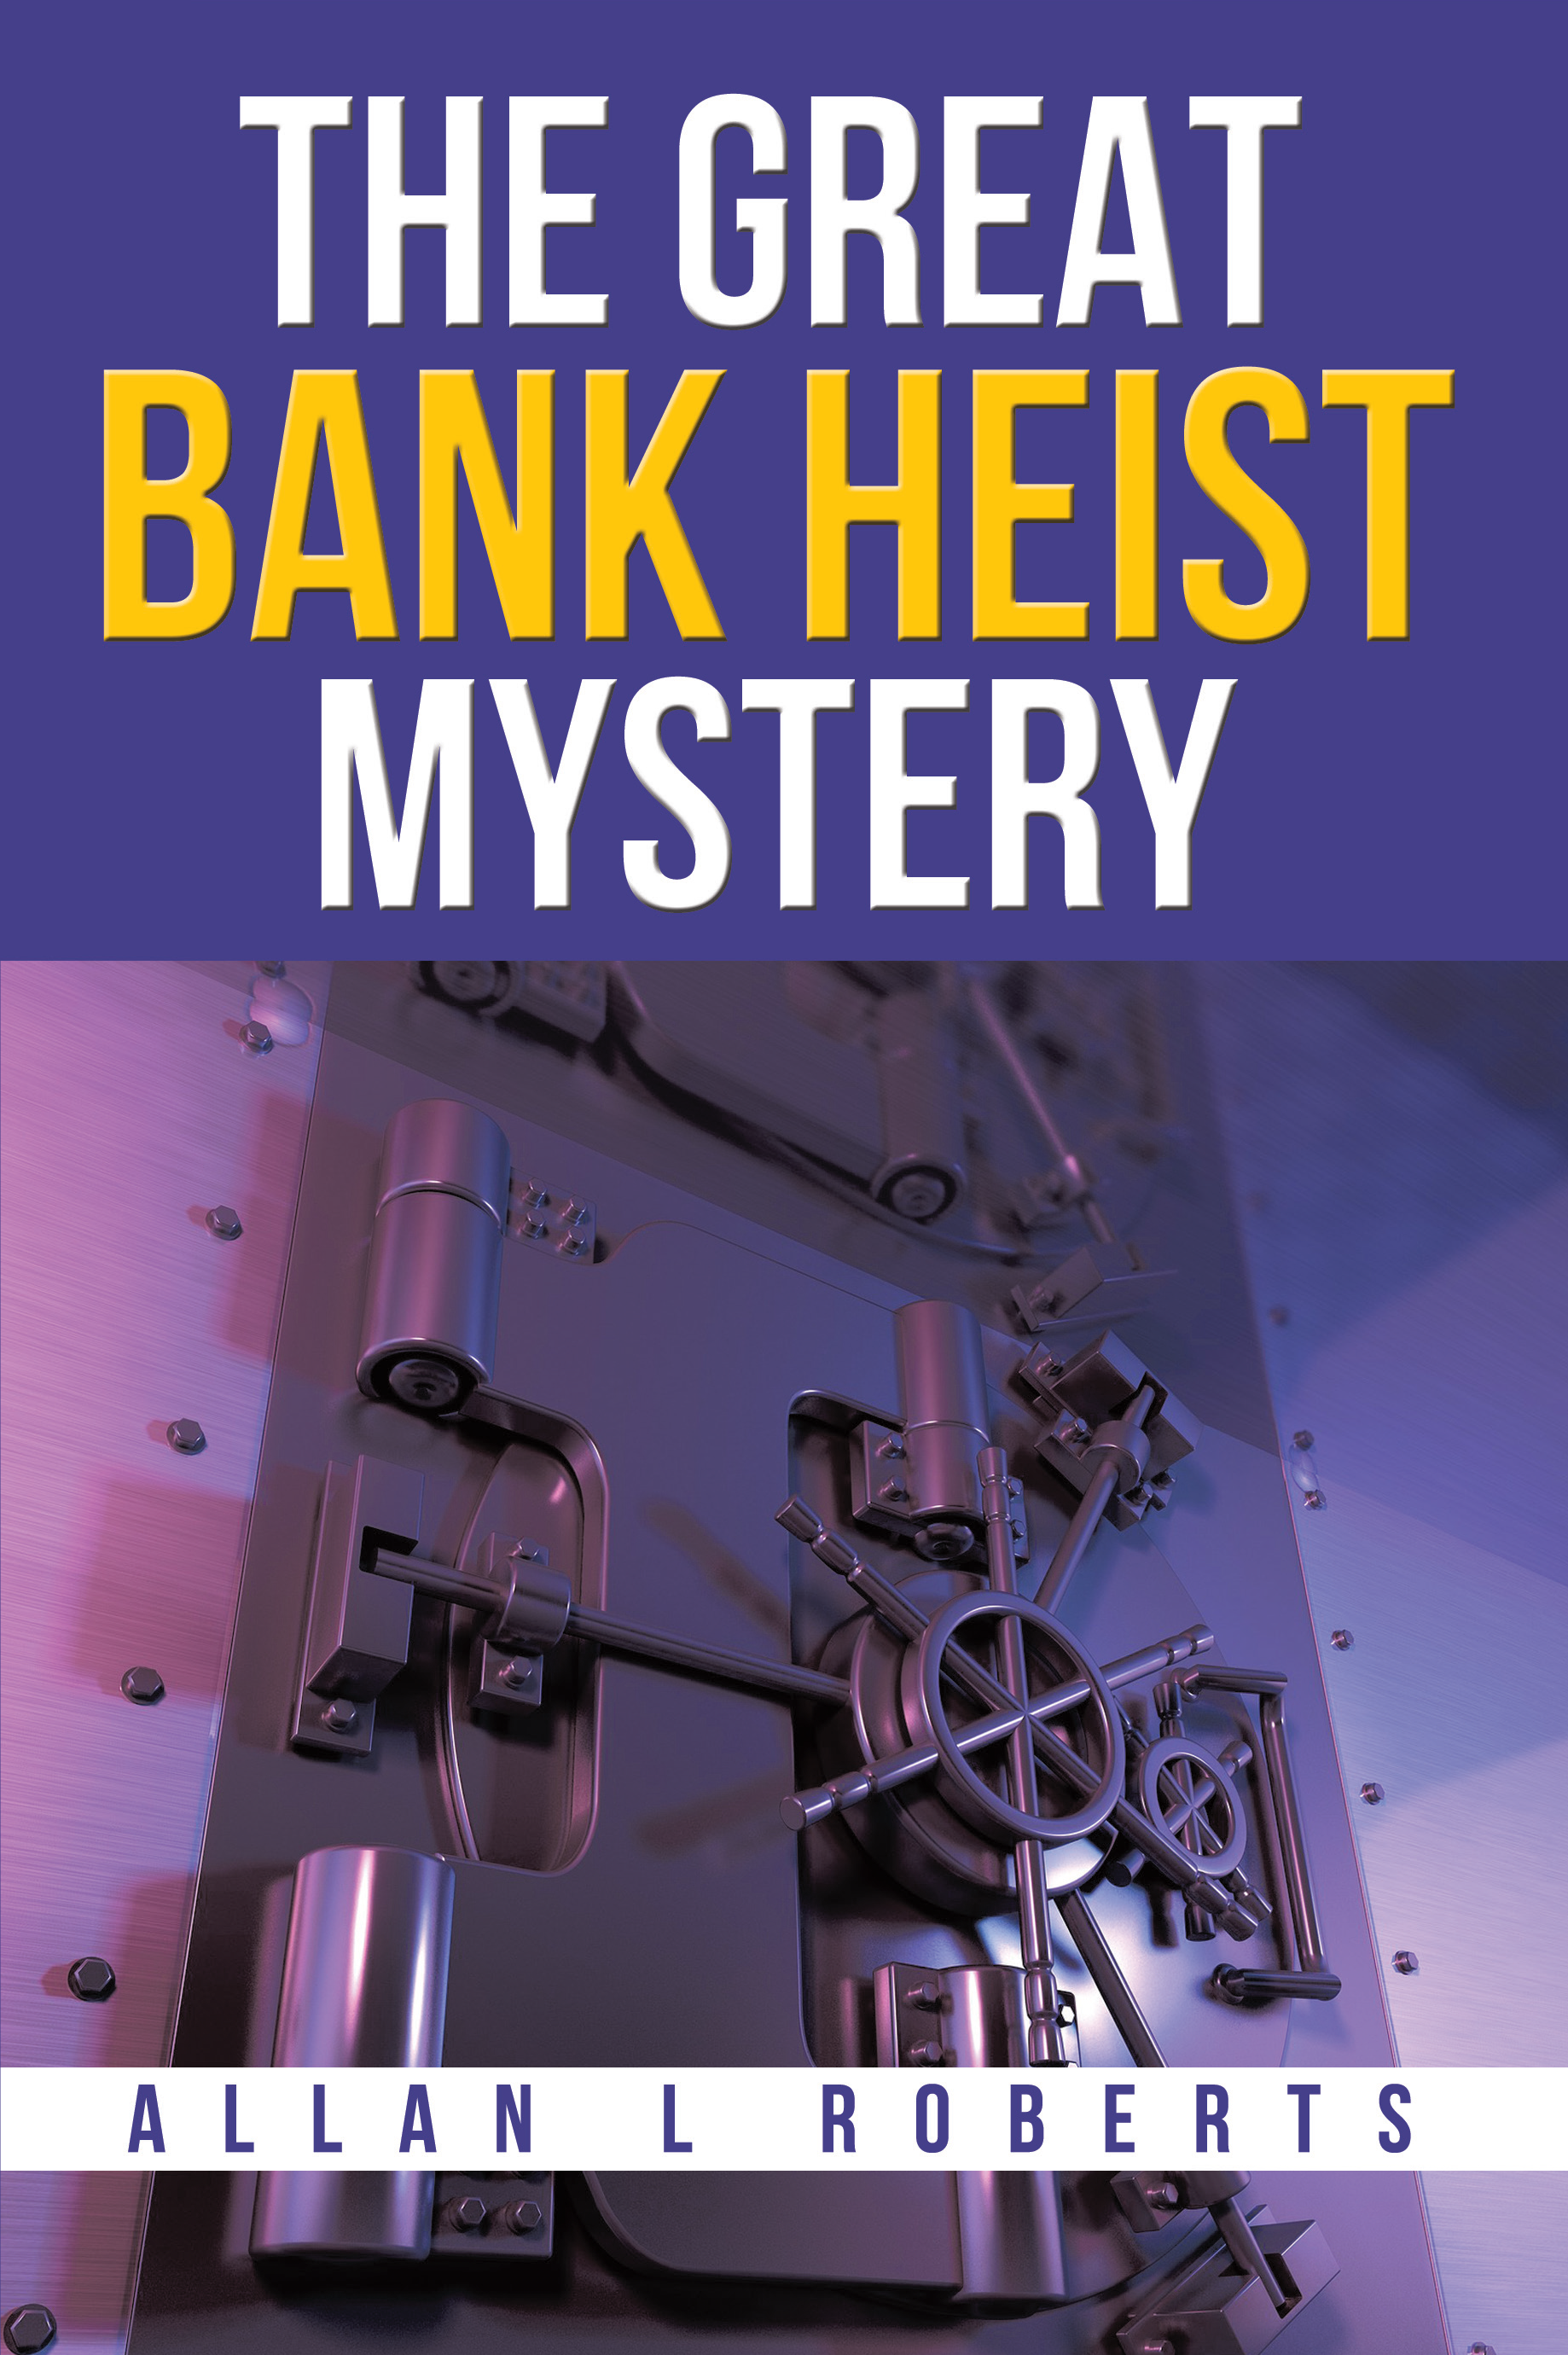 The Great Bank Heist by Allan L Roberts